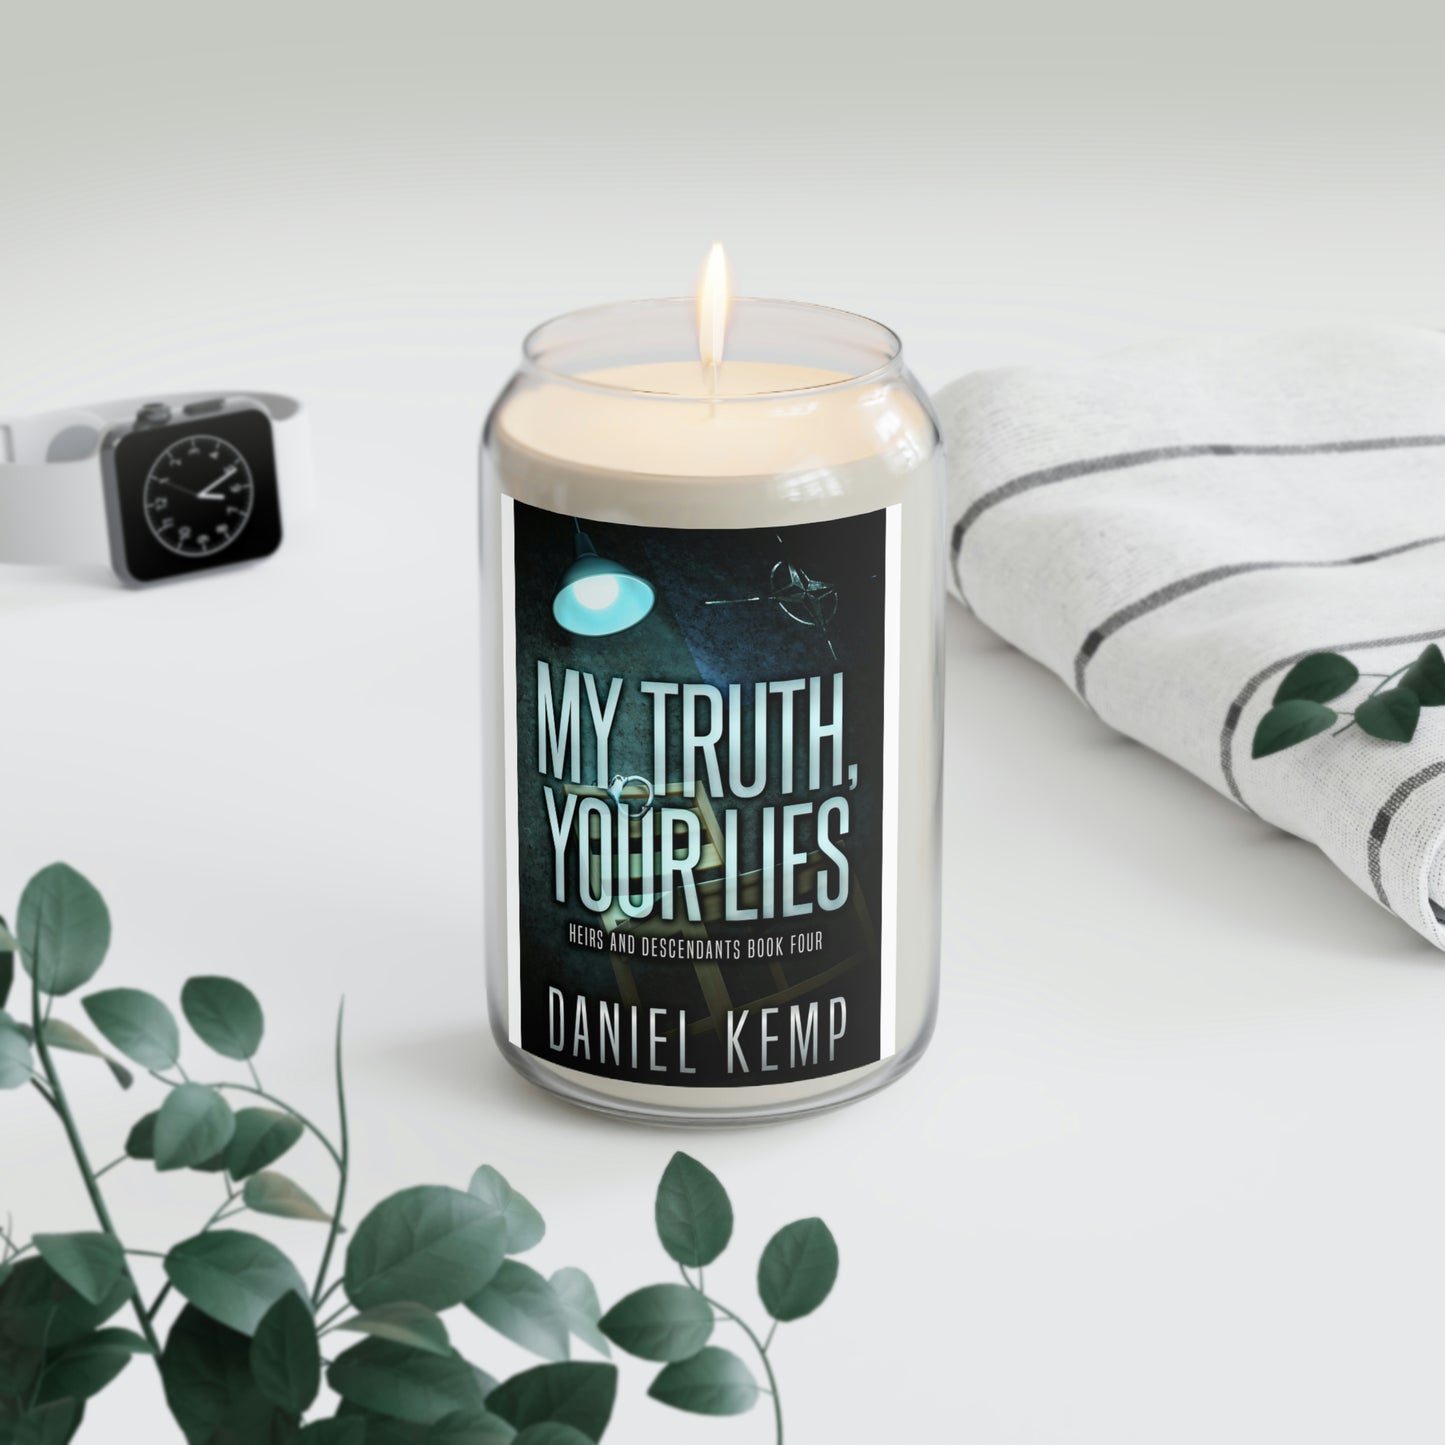 My Truth, Your Lies - Scented Candle